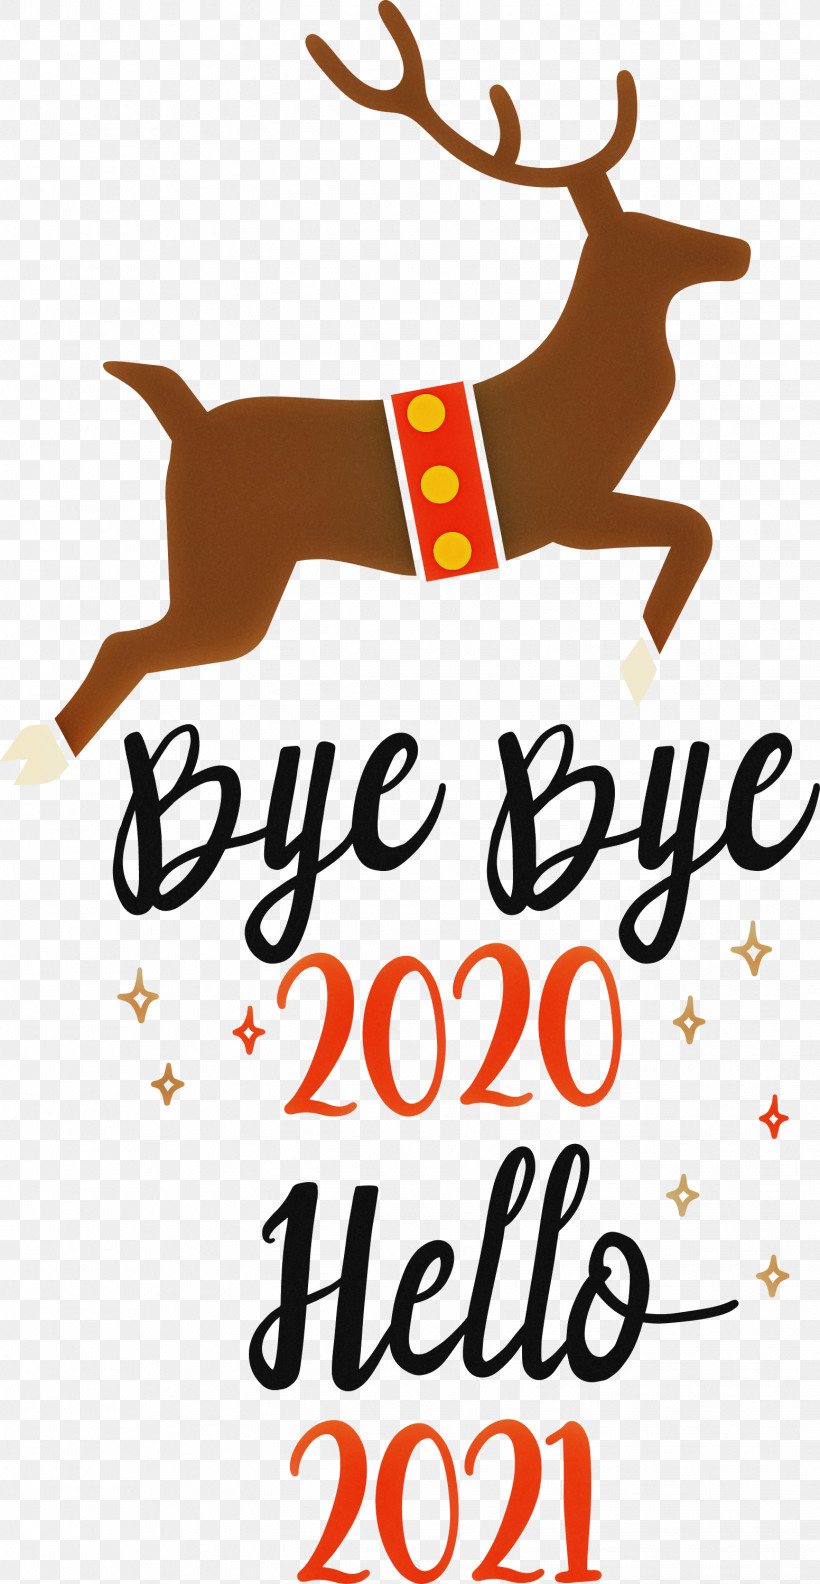 Hello 2021 Year Bye Bye 2020 Year, PNG, 1552x2999px, Hello 2021 Year, Abstract Art, Animation, Bye Bye 2020 Year, Christmas Day Download Free